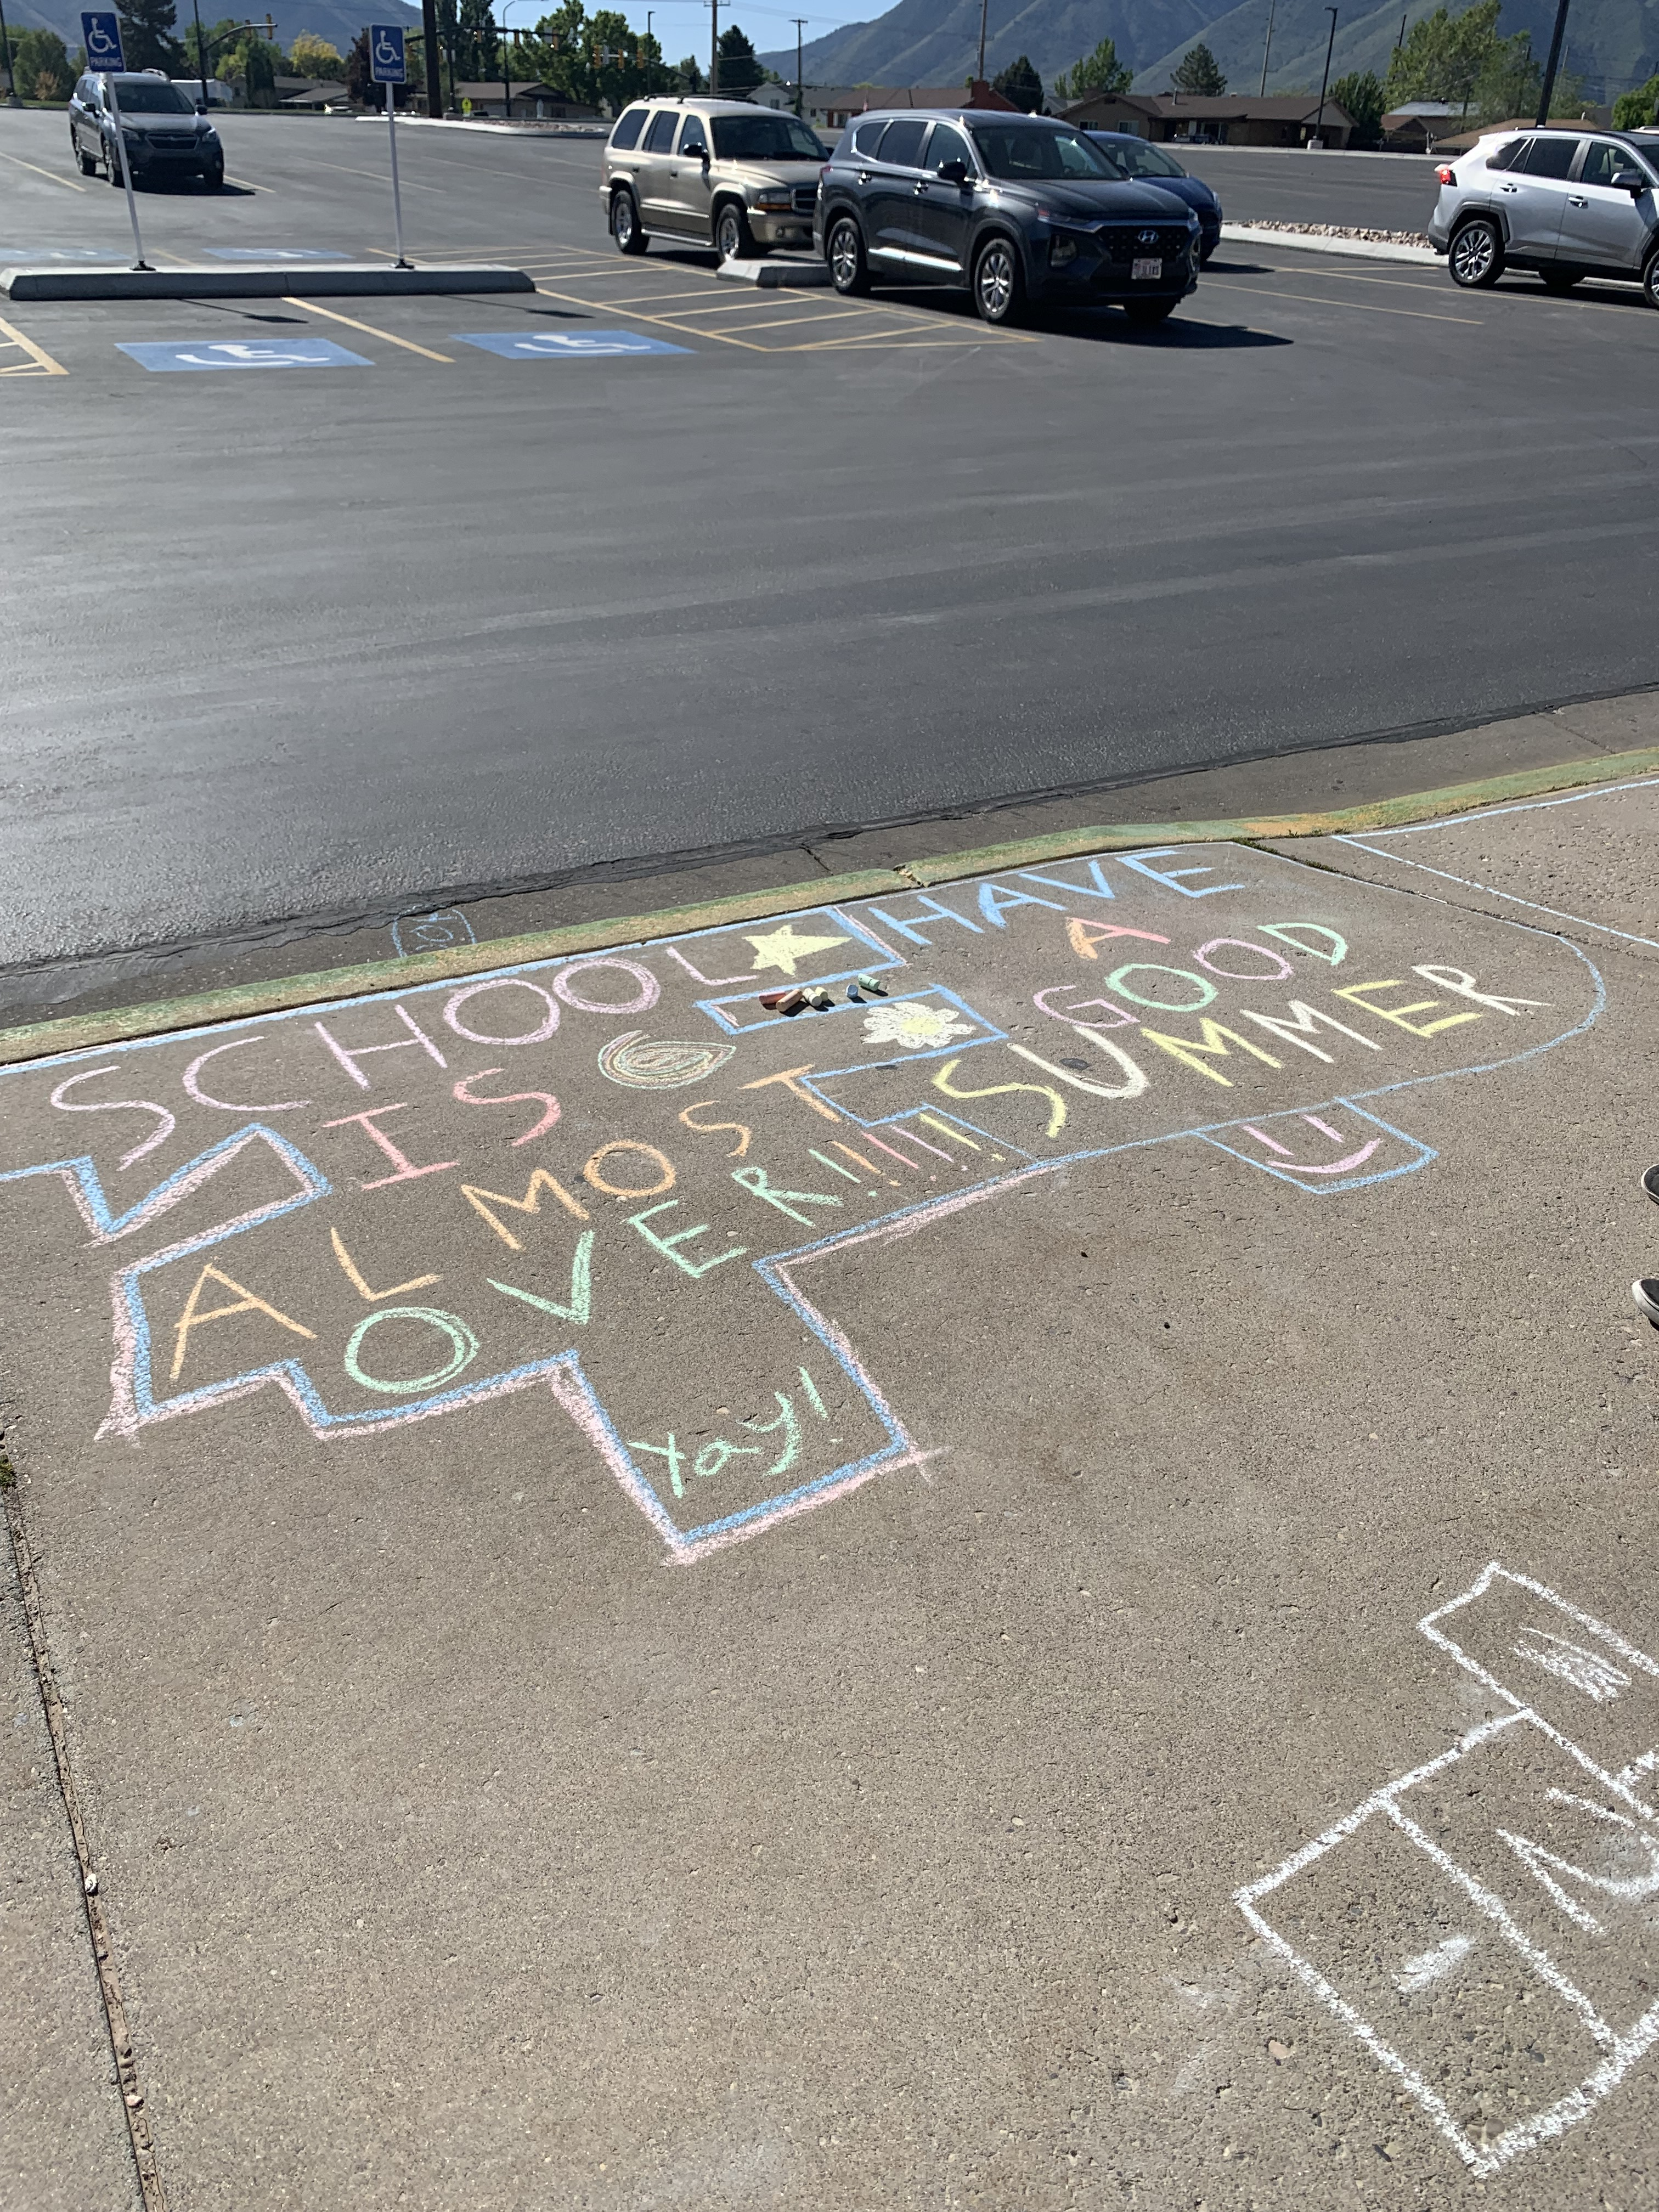 Students writing with chalk on the sidewalks